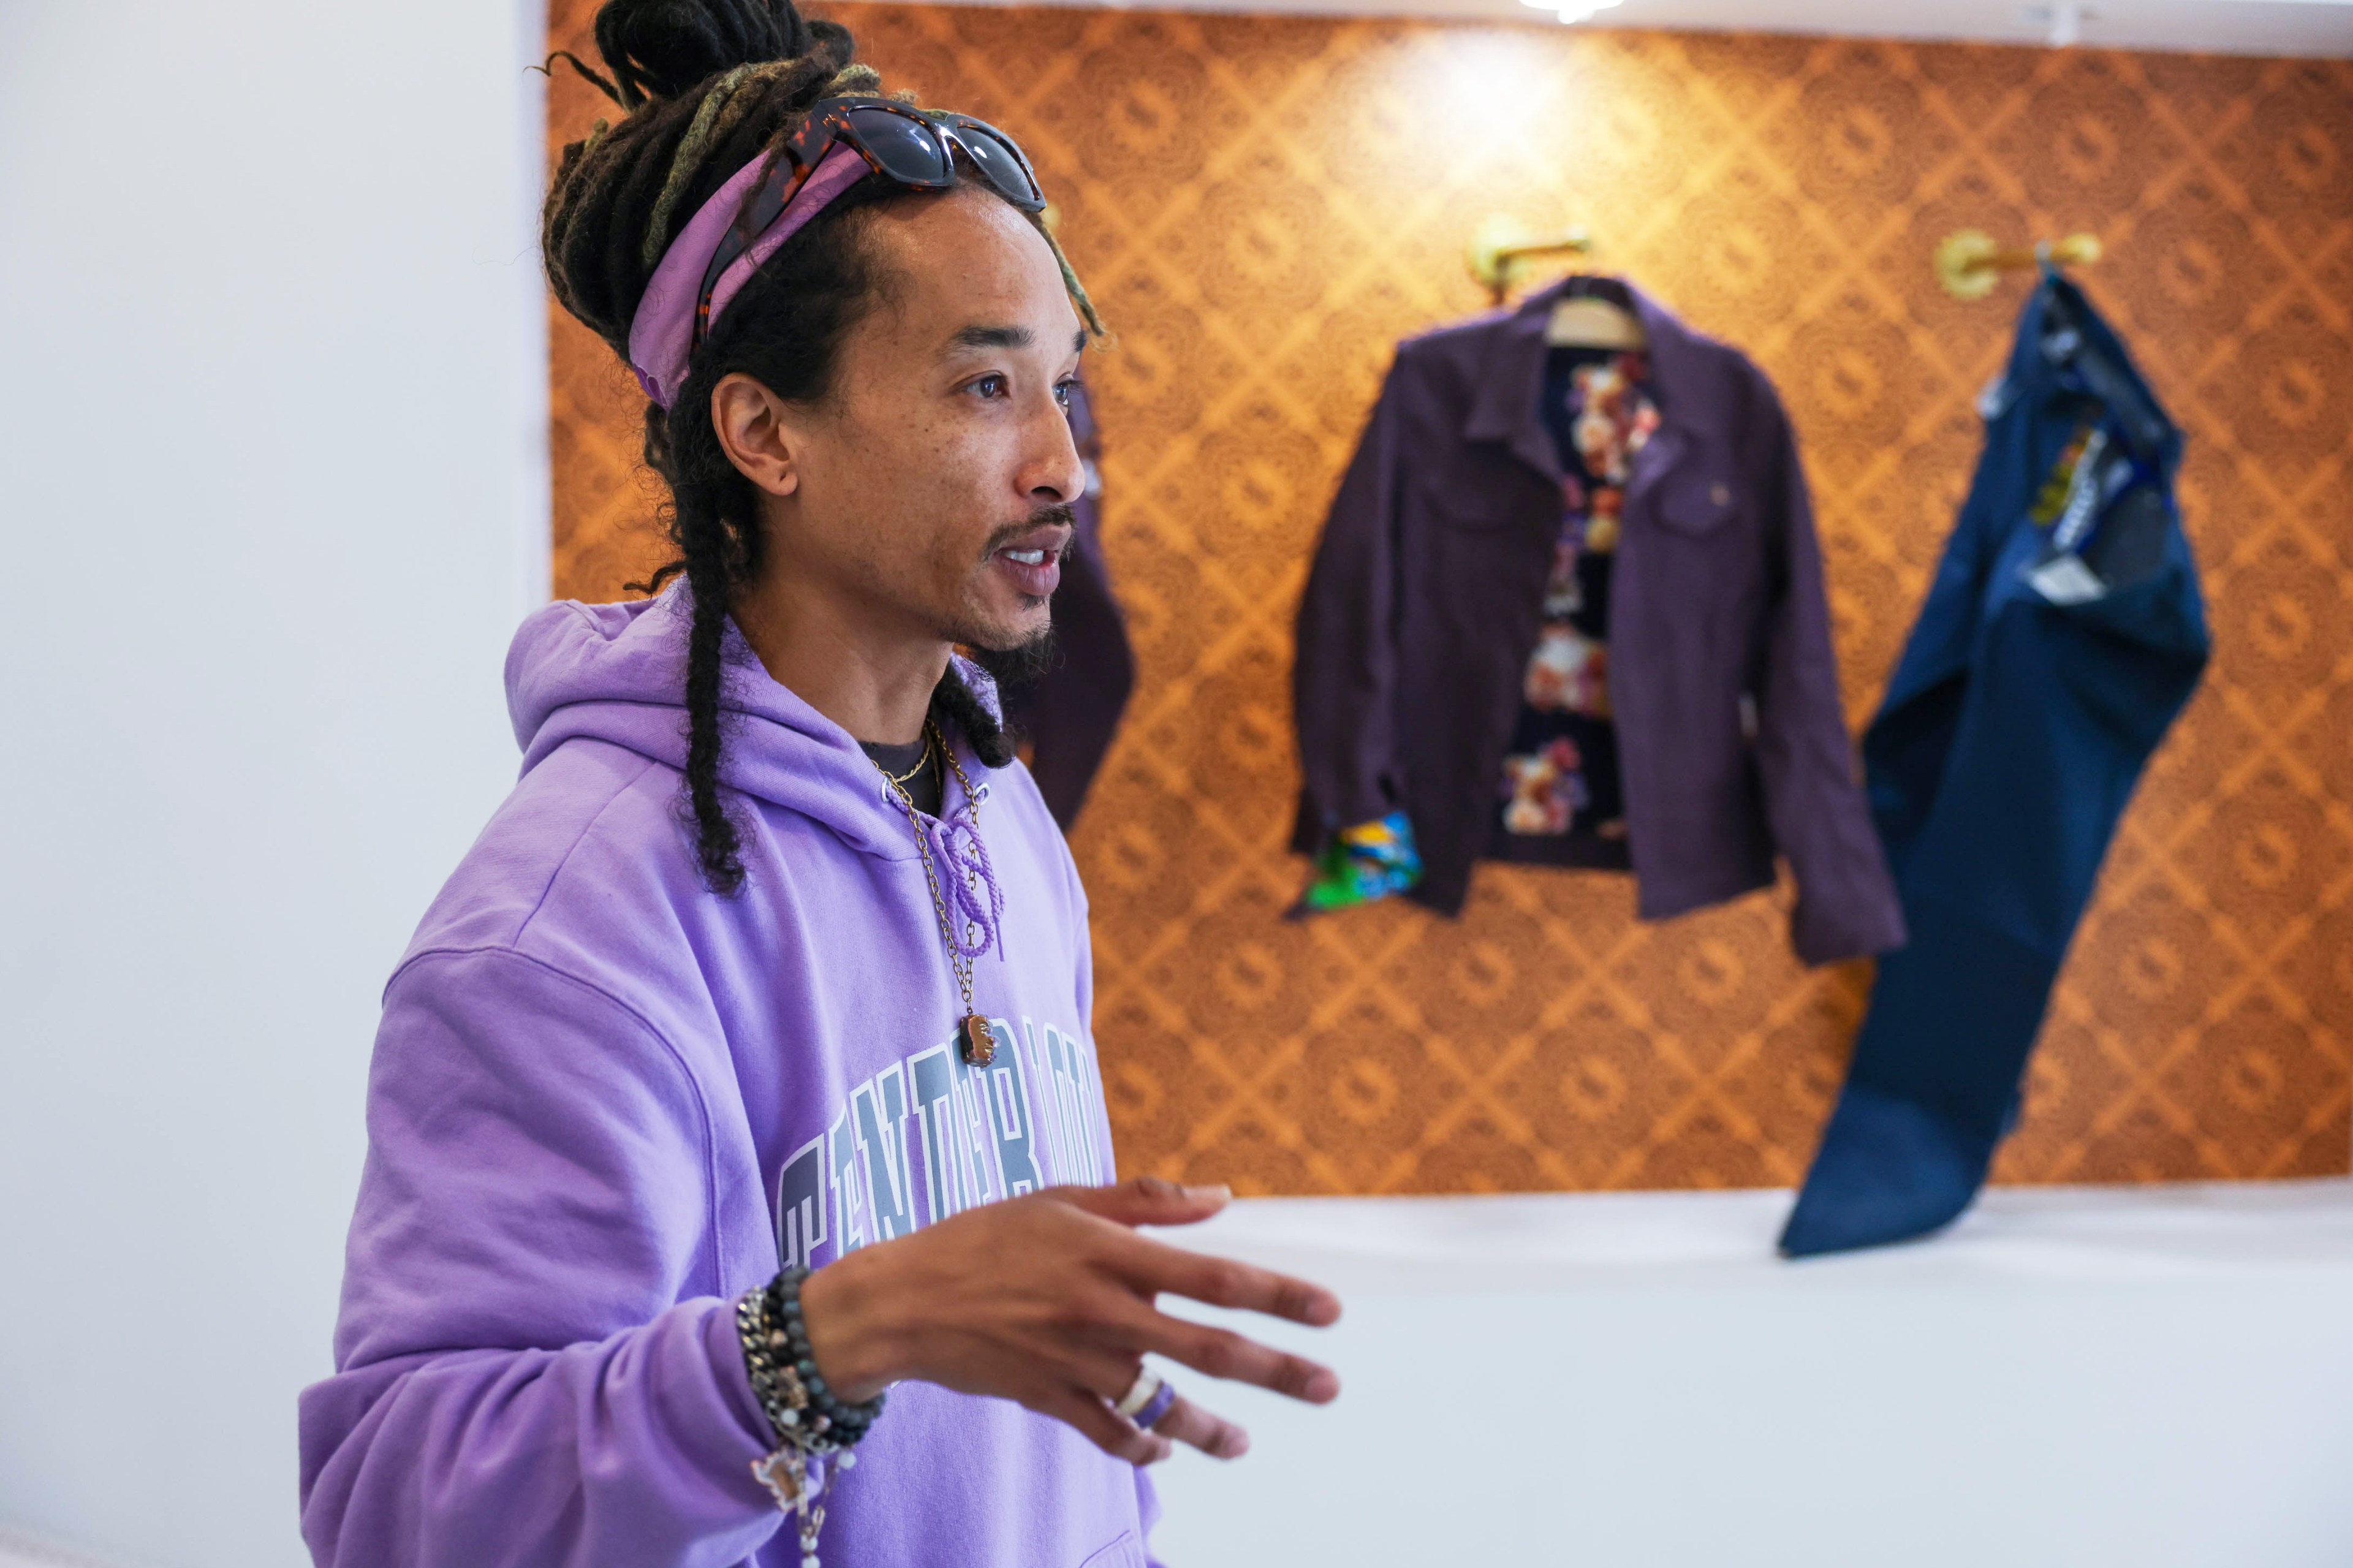 A man in a purple hoodie stands talking, with colorful jackets displayed on a patterned wall behind him.